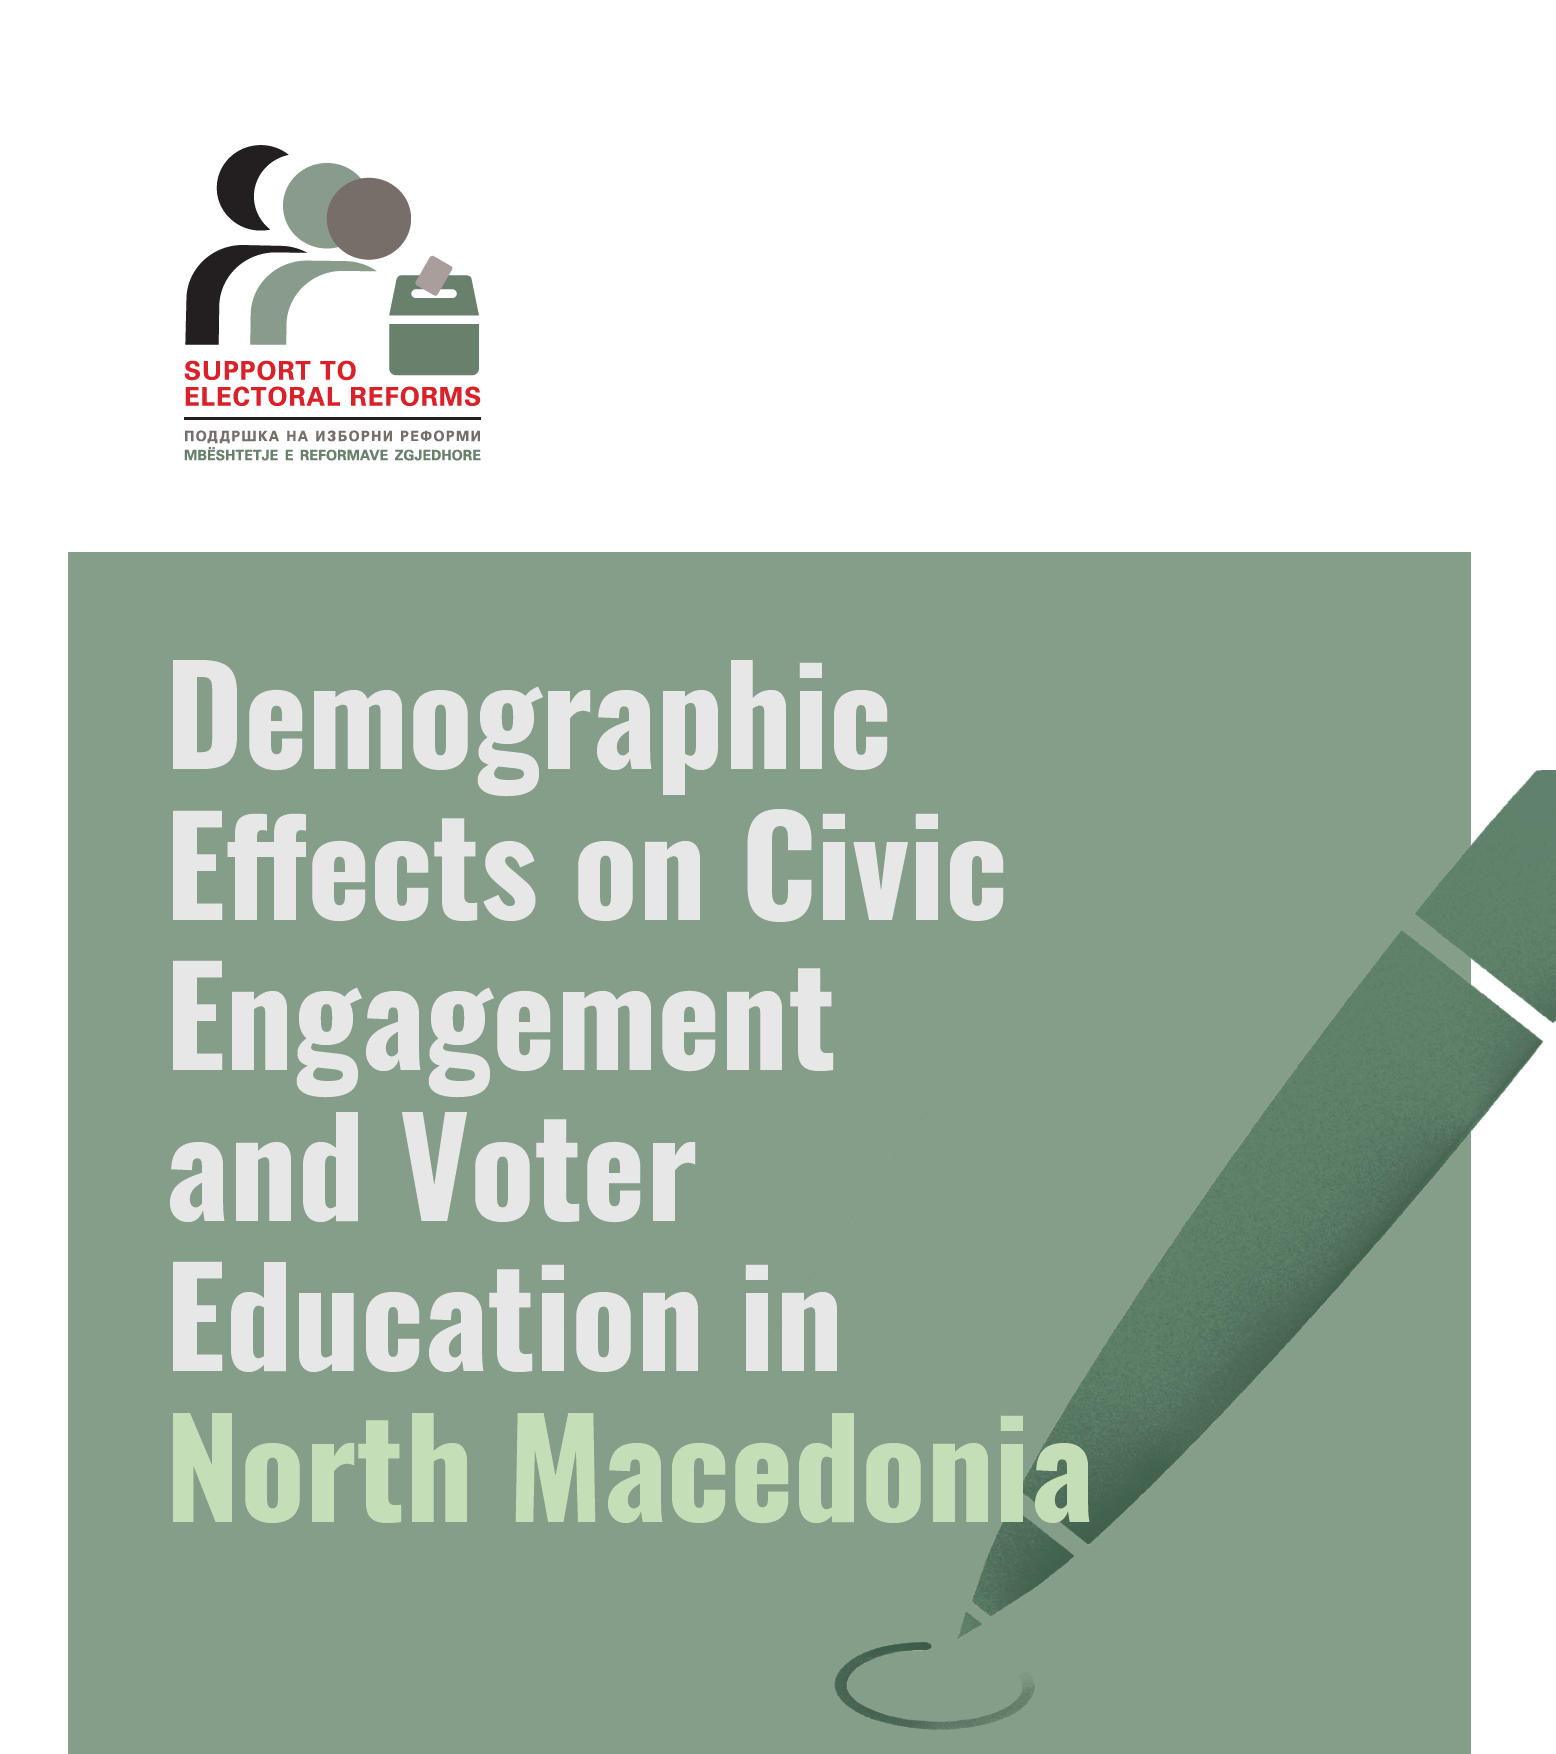 Report on the Demographic Effects on Civic Engagement and Voter Education